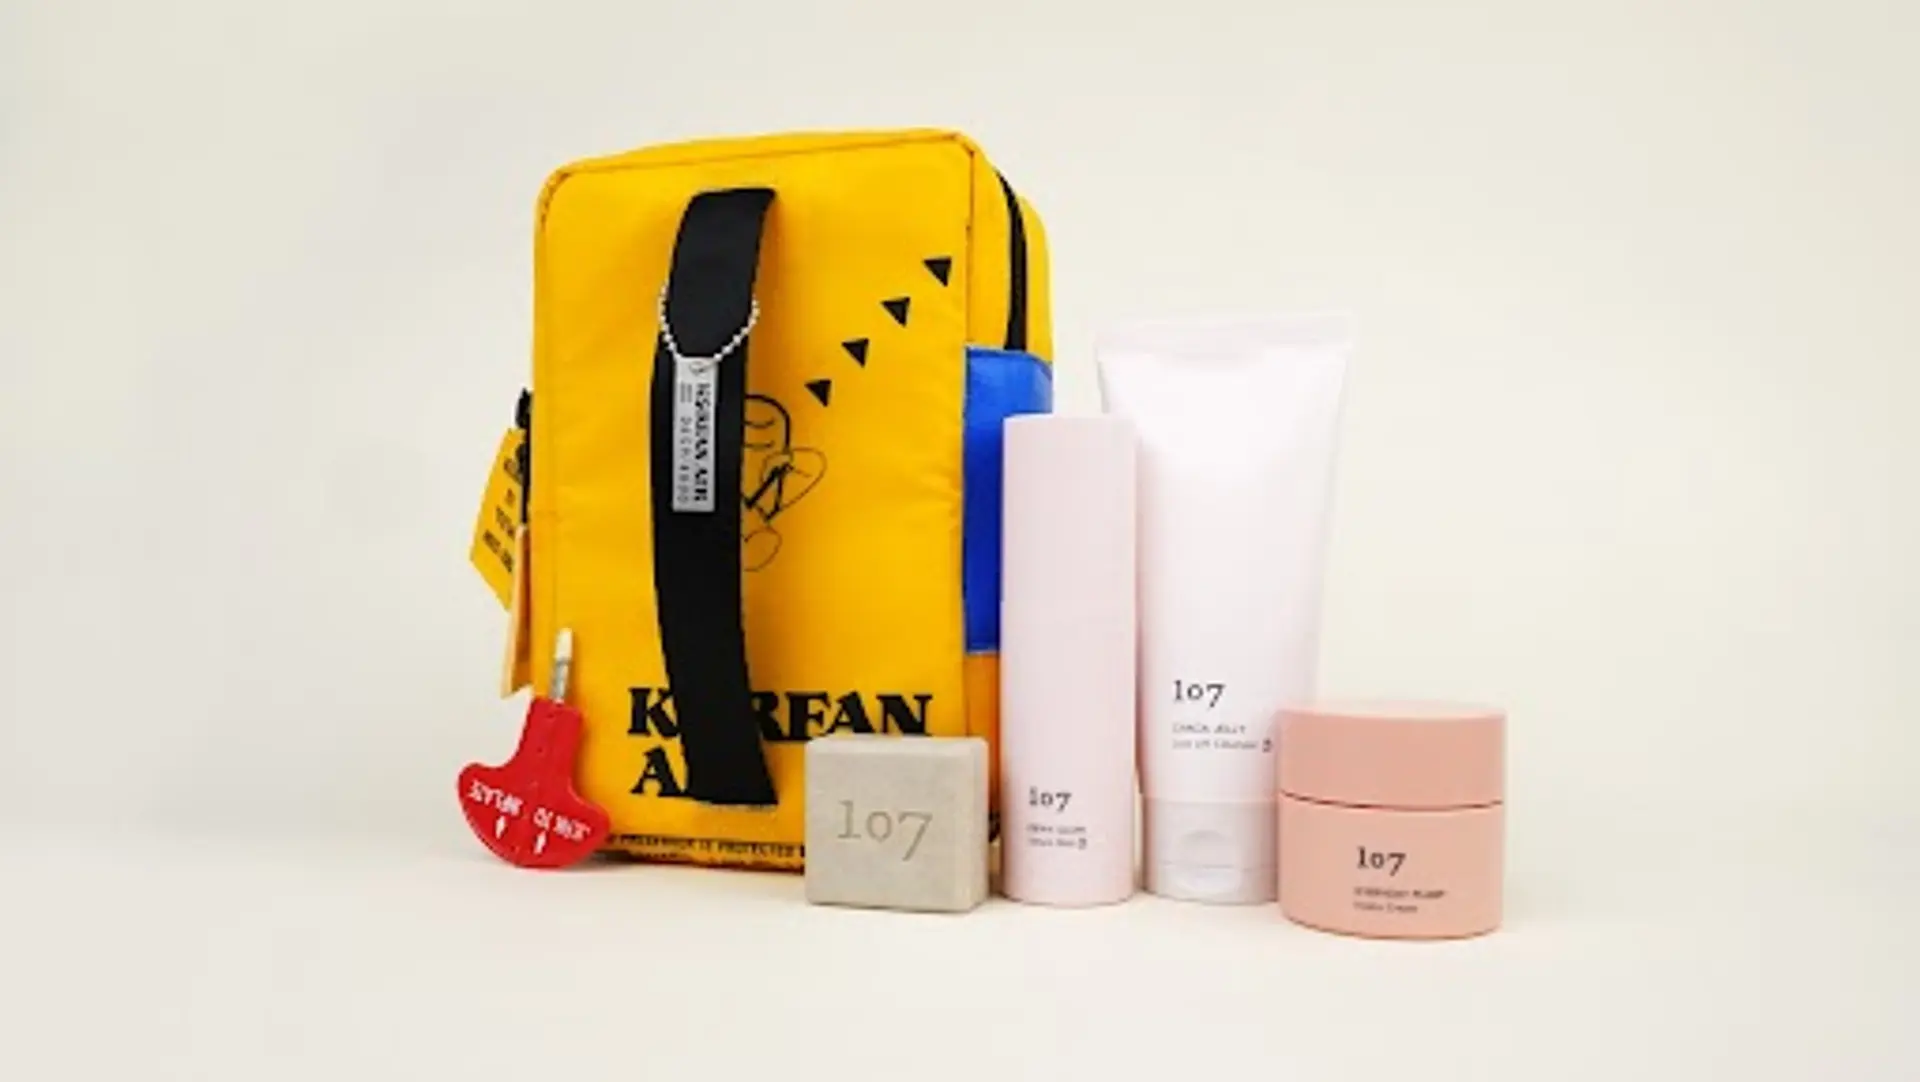 Airlines News - Korean Air recycles life vests into cosmetic pouches